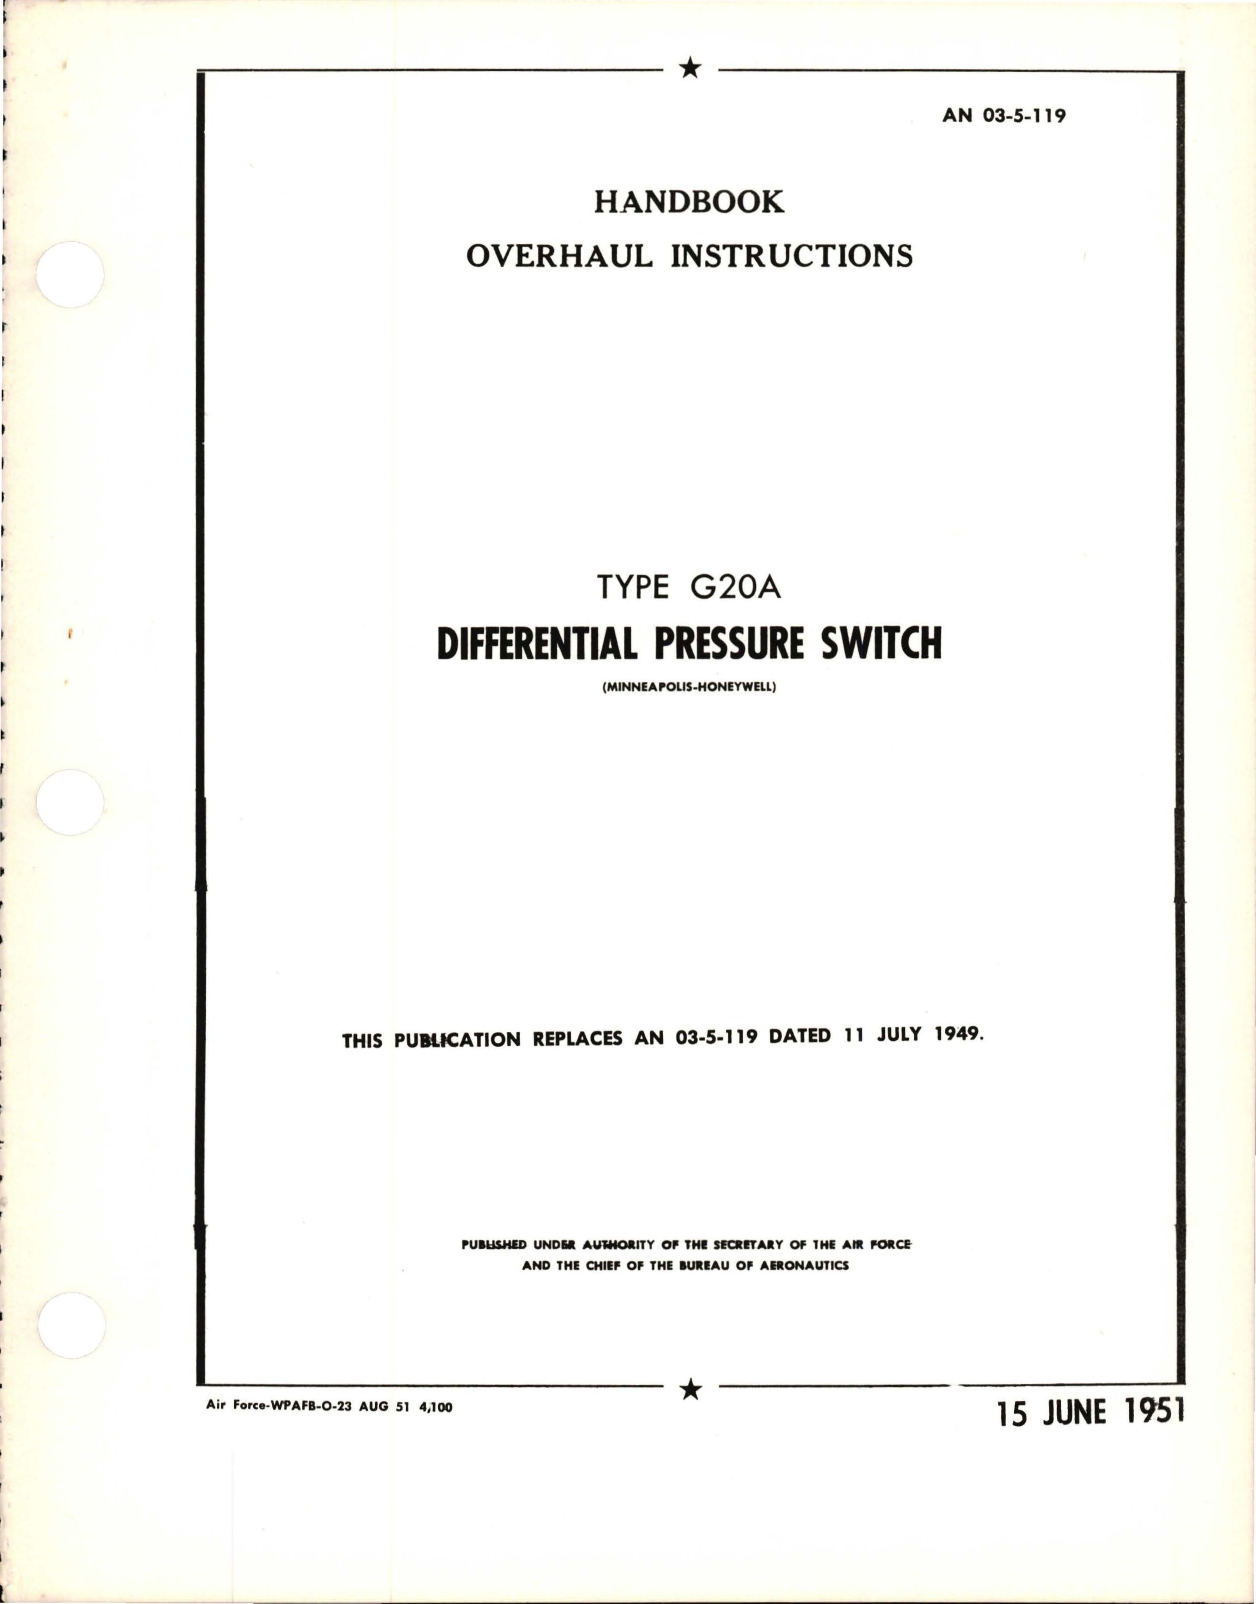 Sample page 1 from AirCorps Library document: Overhaul Instructions for Differential Pressure Switch - Type G20A